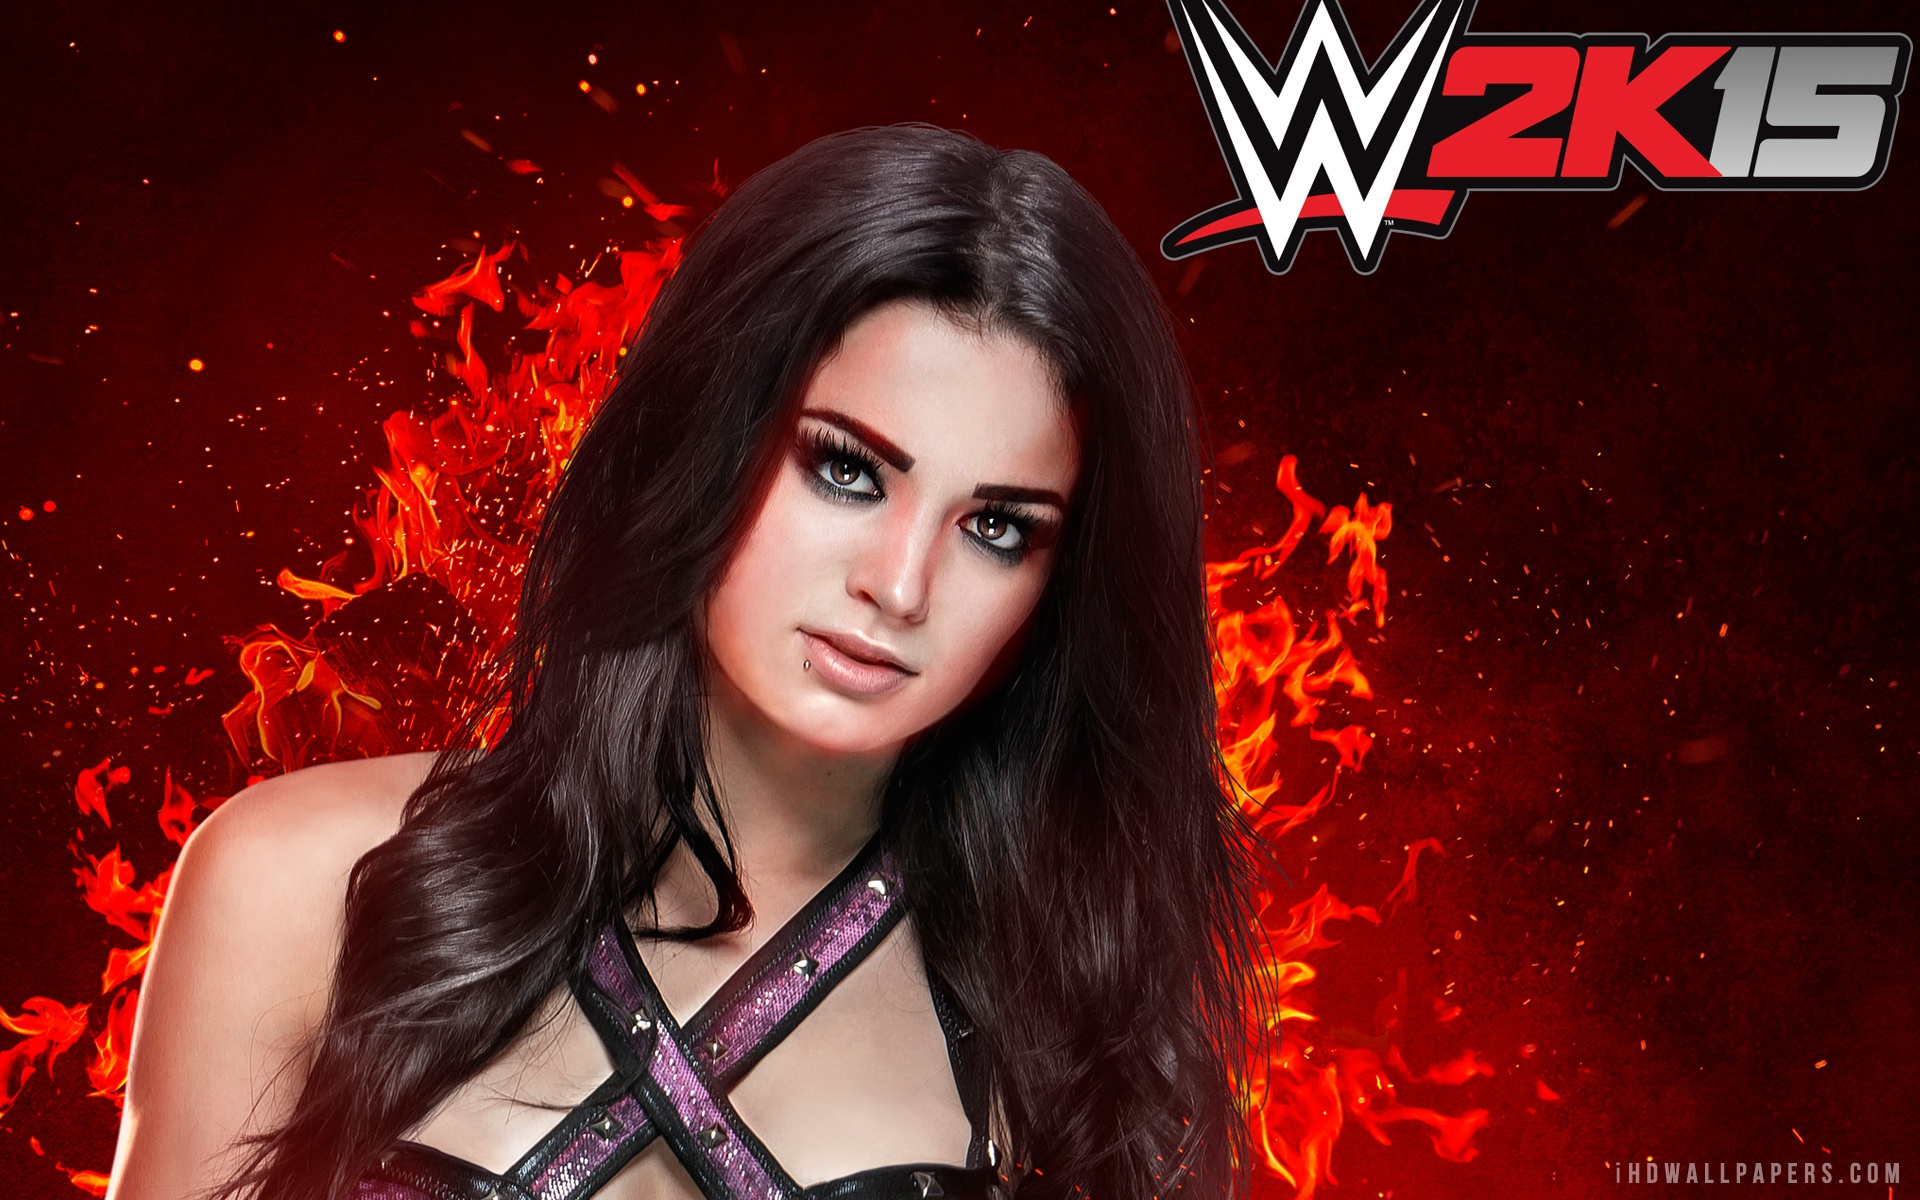 Roman Reigns And Paige Wallpapers on